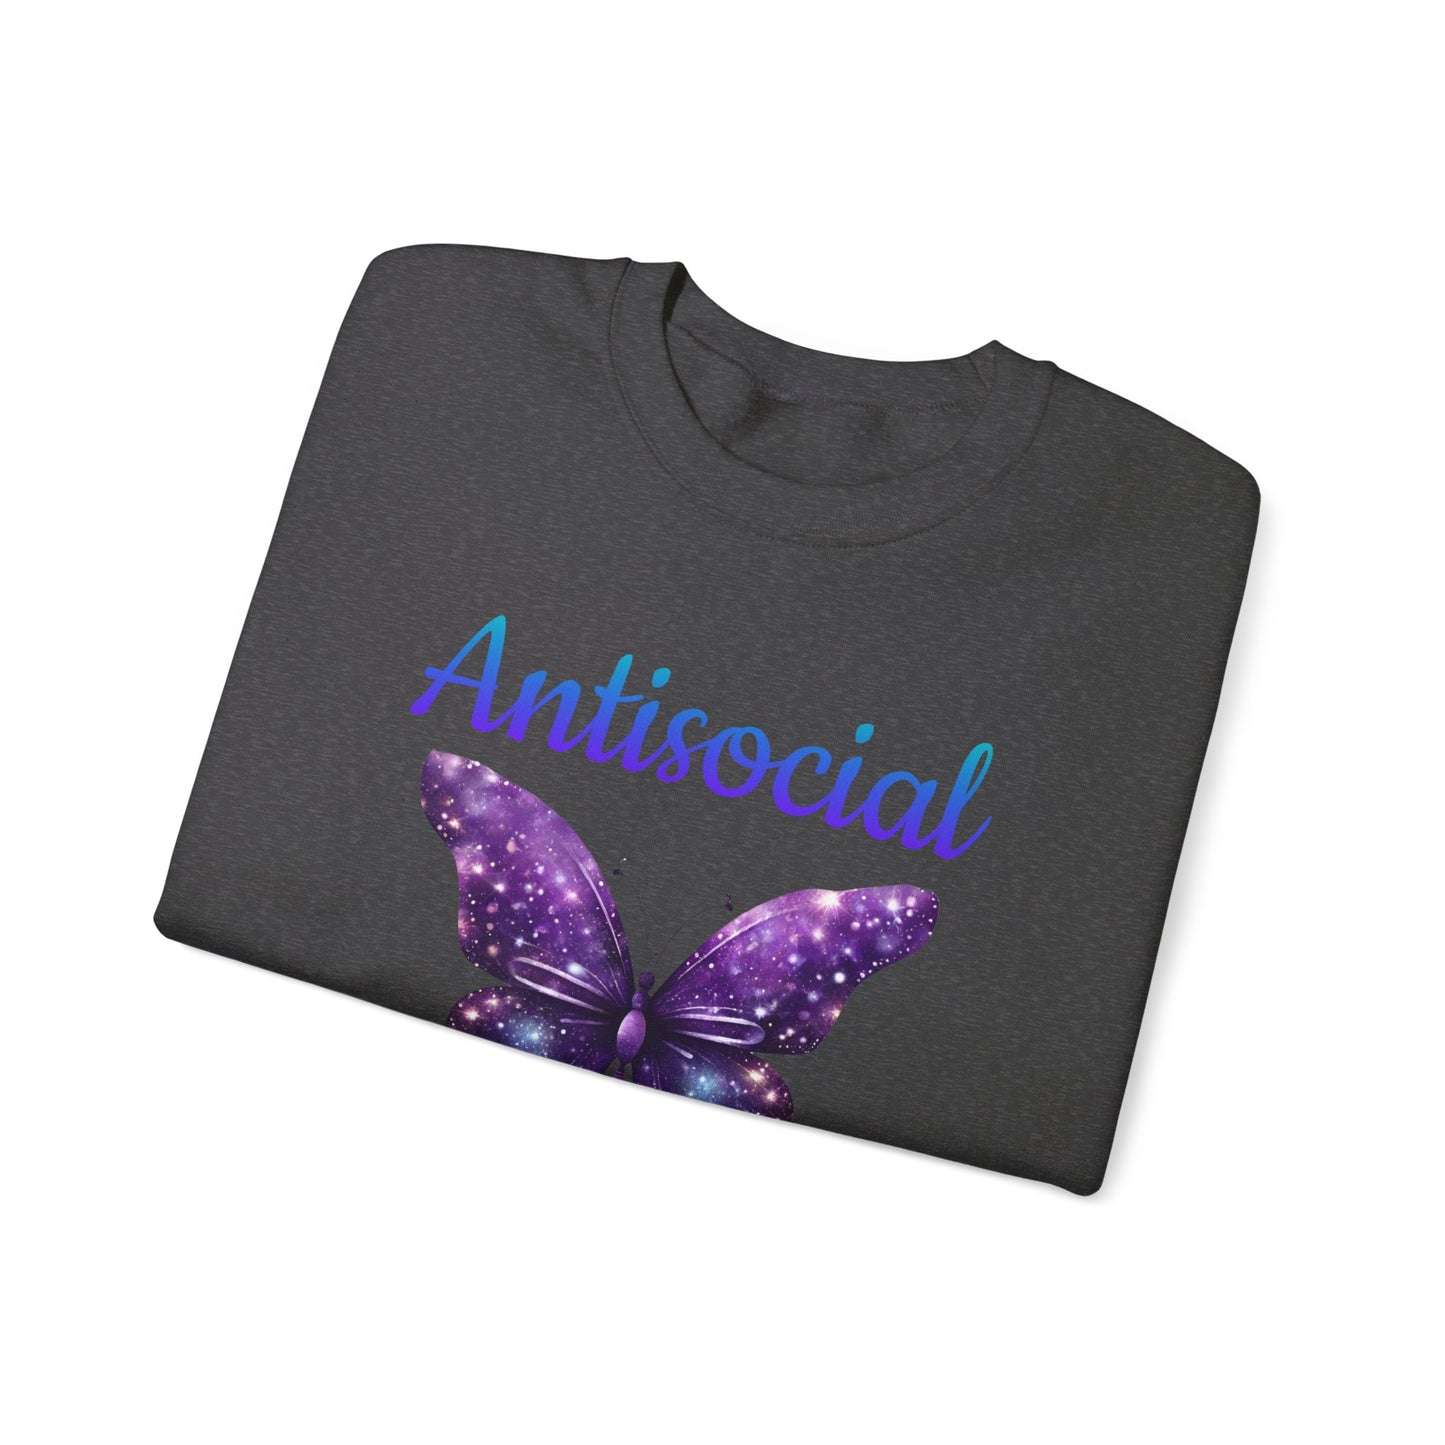 Antisocial Butterfly woman's graphic Sweatshirt, Butterfly mom shirt, introvert shirt, homebody sweatshirt, antisocial butterfly top, gifts